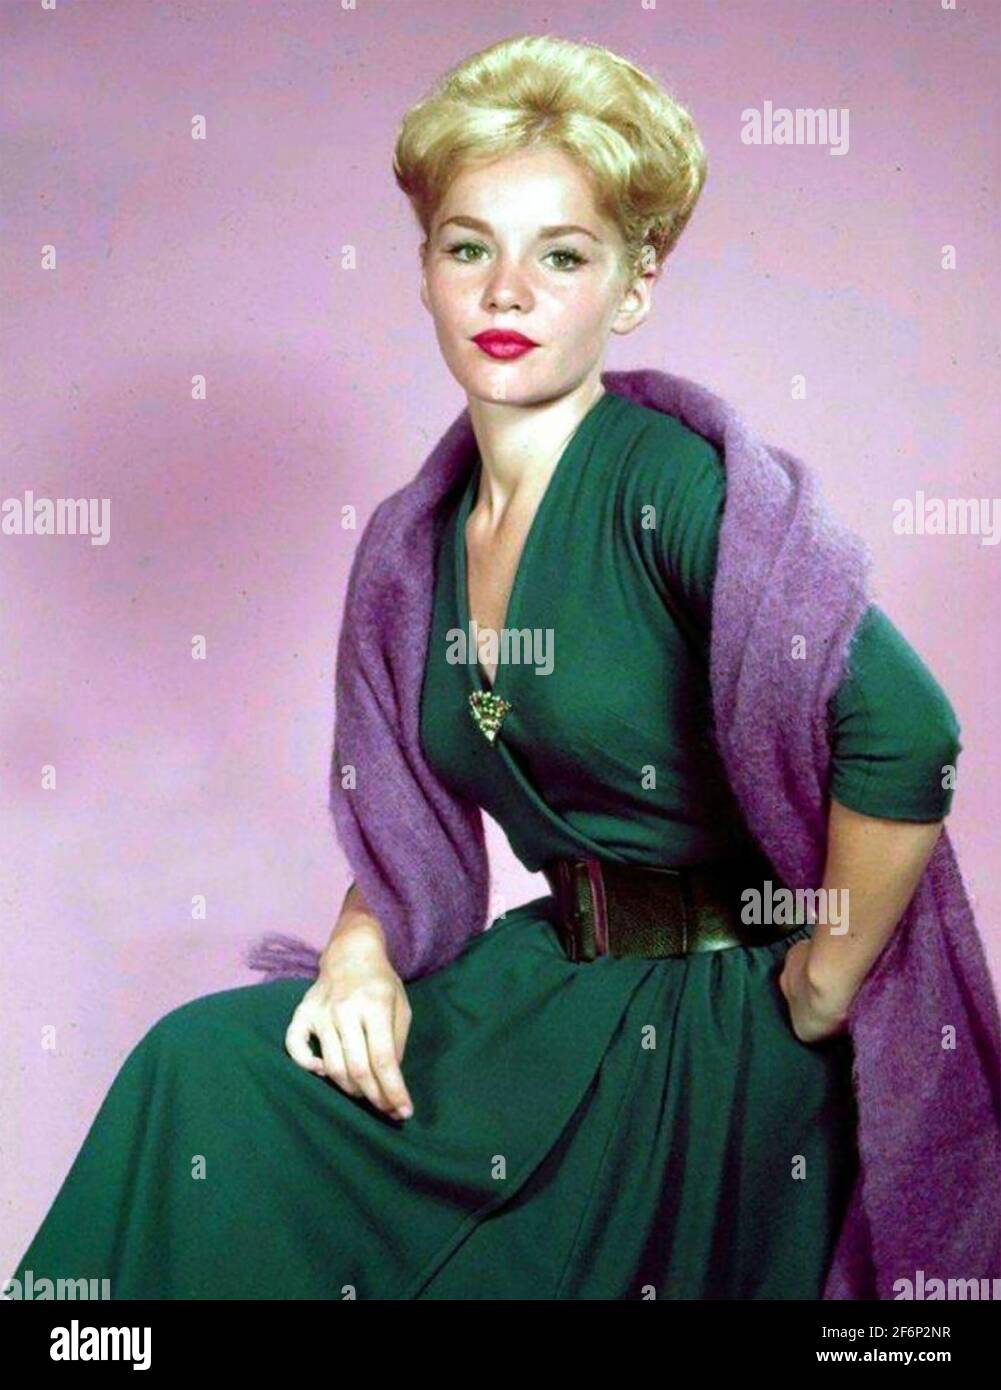 The beautiful and The best - Tuesday Weld, American actress, in